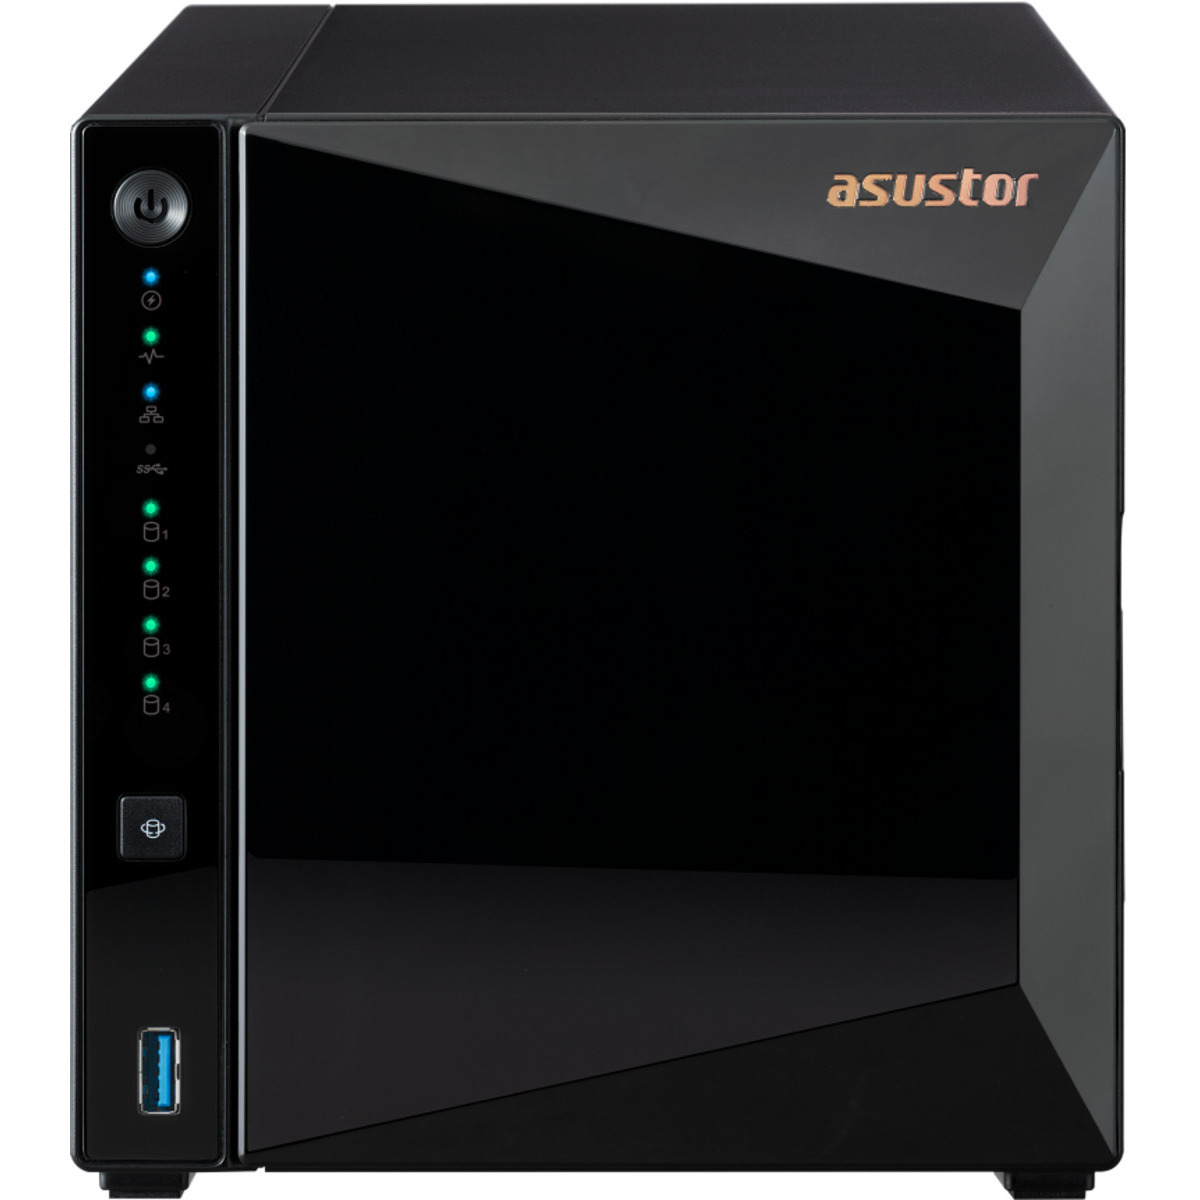 ASUSTOR DRIVESTOR 4 Pro Gen2 AS3304T v2 72tb 4-Bay Desktop Personal / Basic Home / Small Office NAS - Network Attached Storage Device 3x24tb Seagate IronWolf Pro ST24000NT002 3.5 7200rpm SATA 6Gb/s HDD NAS Class Drives Installed - Burn-In Tested - ON SALE DRIVESTOR 4 Pro Gen2 AS3304T v2